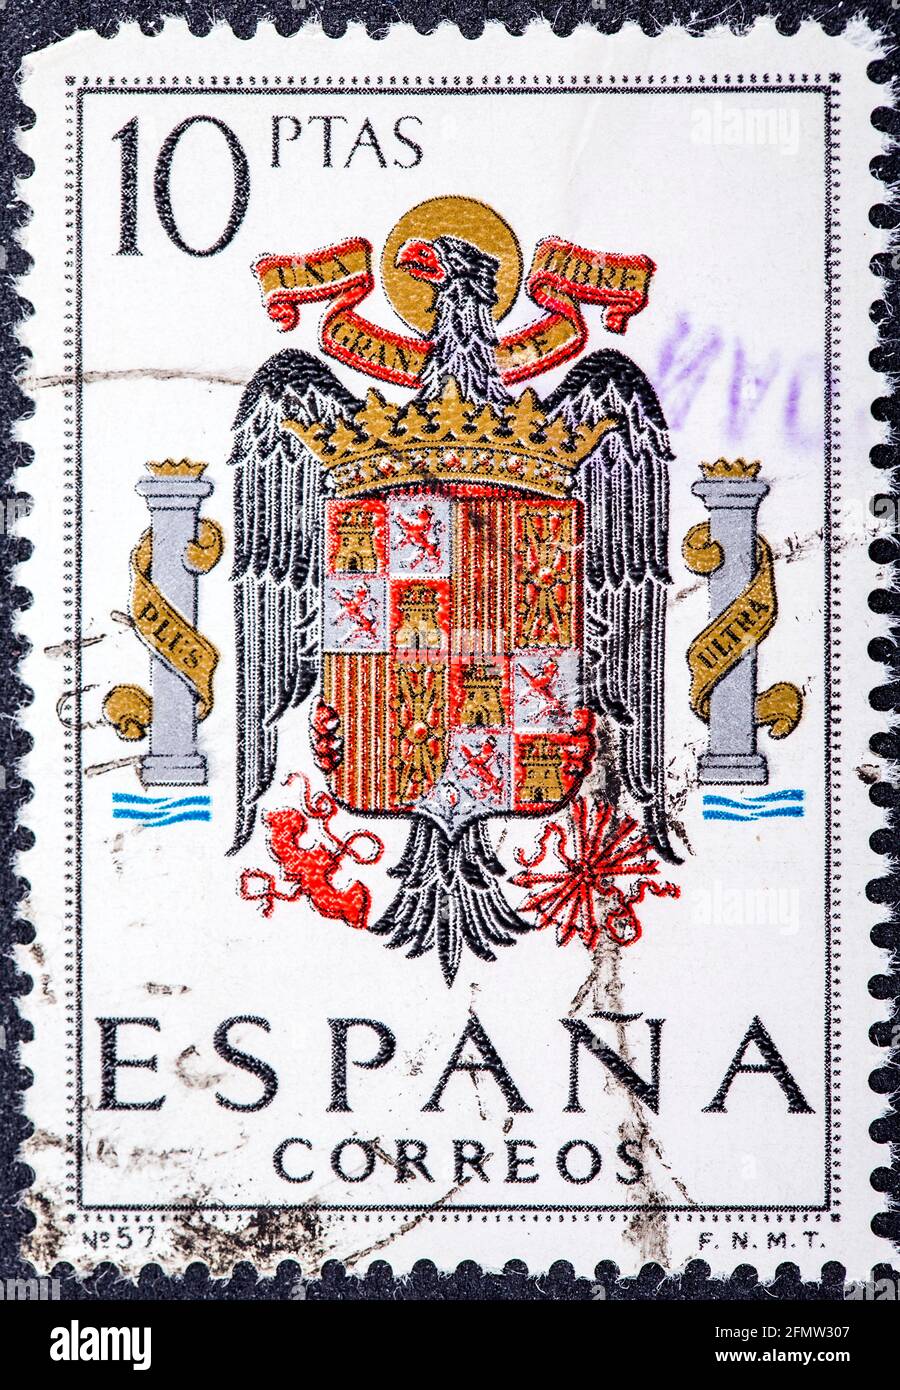 SPAIN - CIRCA 1965: A stamp printed in Spain shows shield of Spain during the Franco dictatorship, circa 1965. Stock Photo